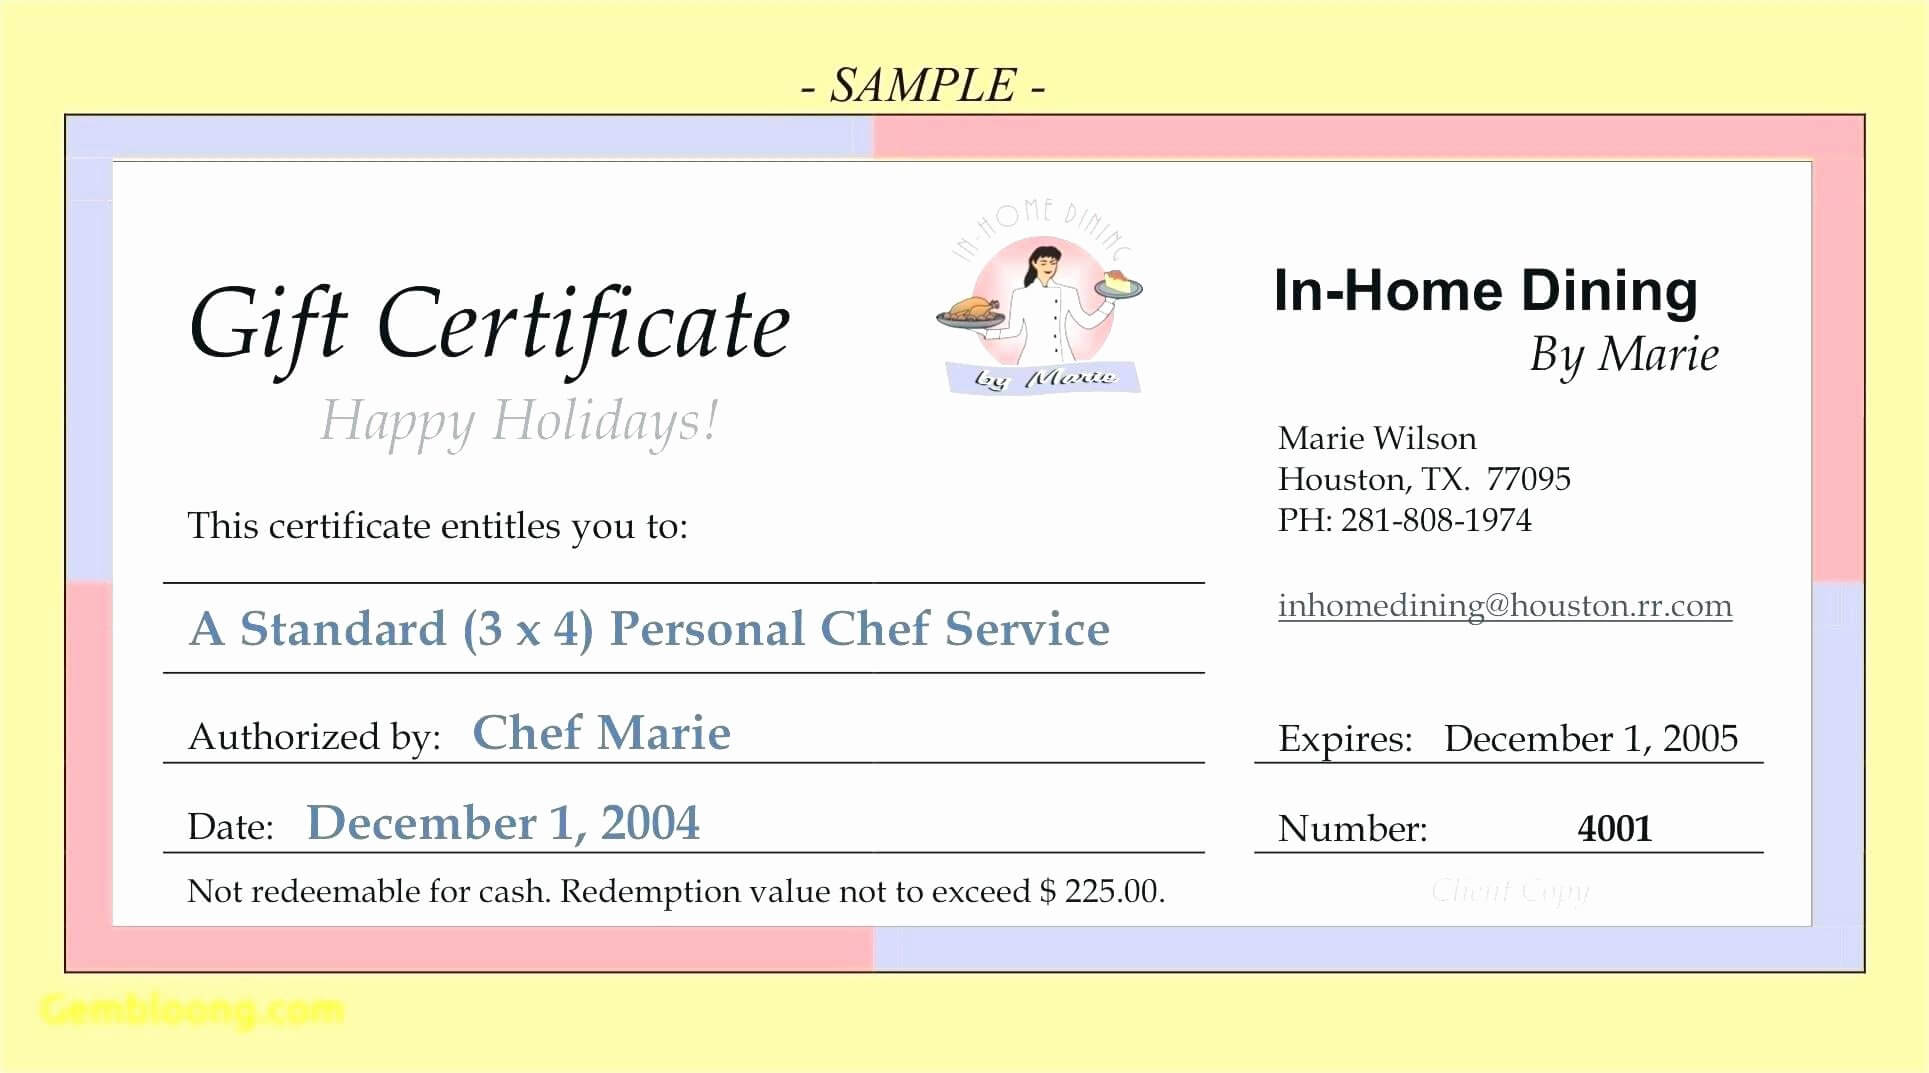 30 The Bearer Of This Certificate Is Entitled To Template With This Certificate Entitles The Bearer Template